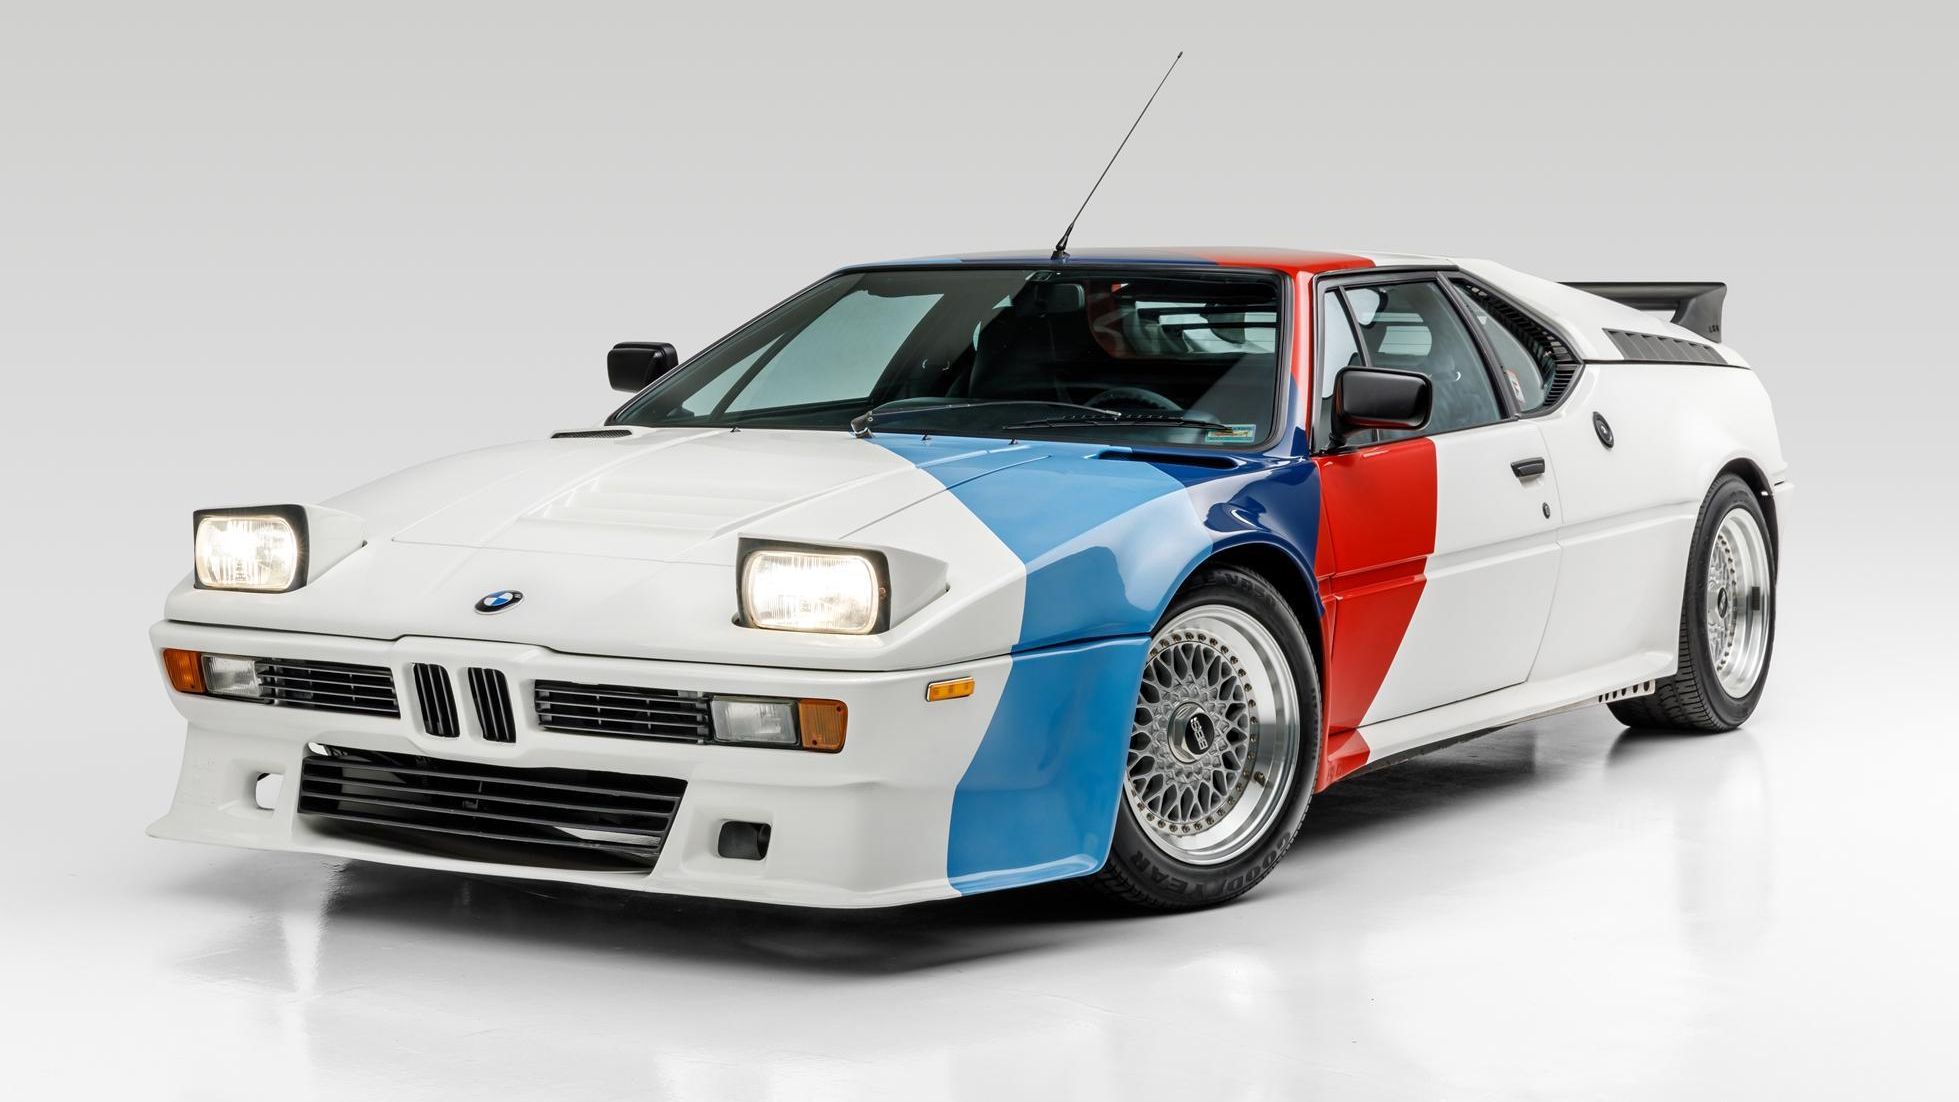 1980's BMW M1 BMW M racing livery owned by Paul Walker